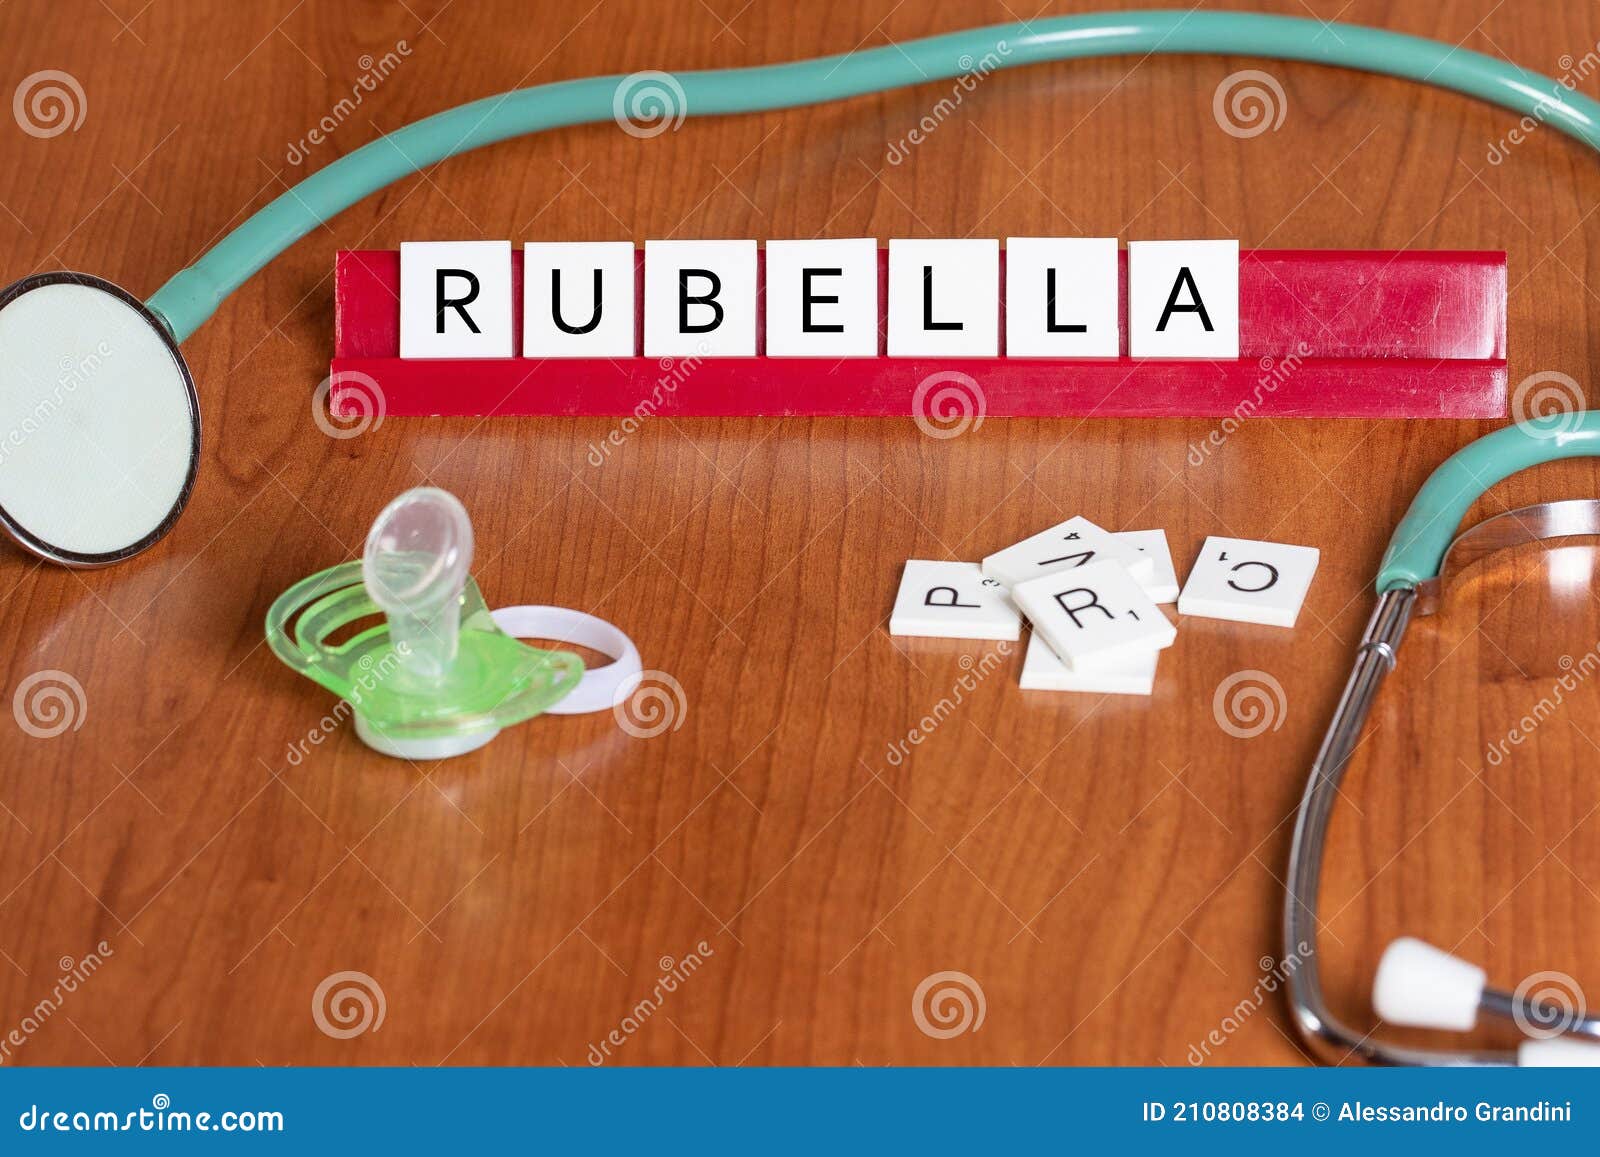 detail of stethoscope on table with rubella written reproduced with scrubble letters, pacifier